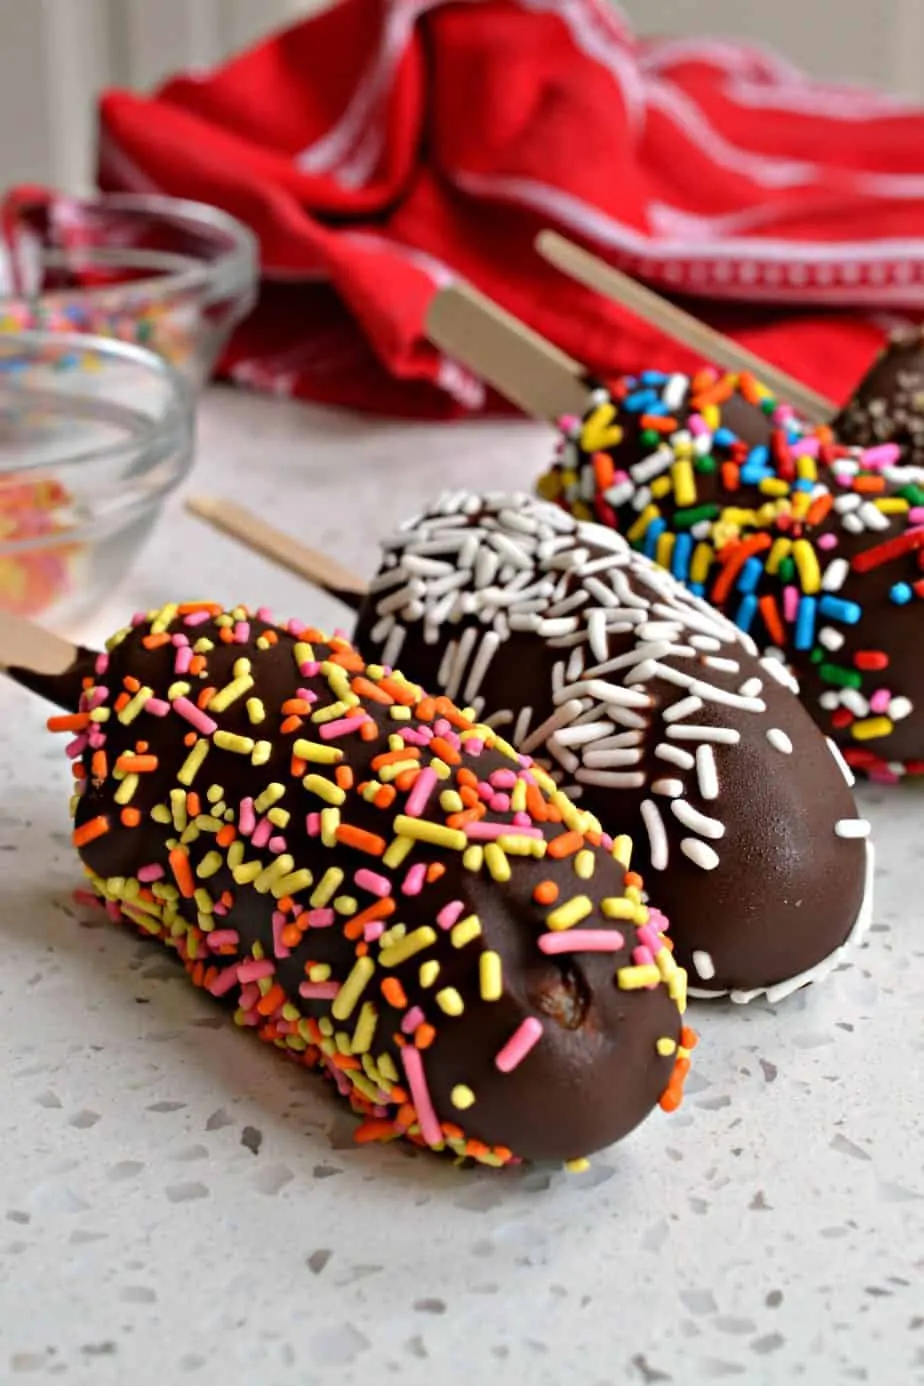 These delectable Frozen Chocolate Covered Bananas, also know as Banana Pops are dipped in rich chocolate and sprinkled with nuts, oats, graham crackers and sprinkles.  